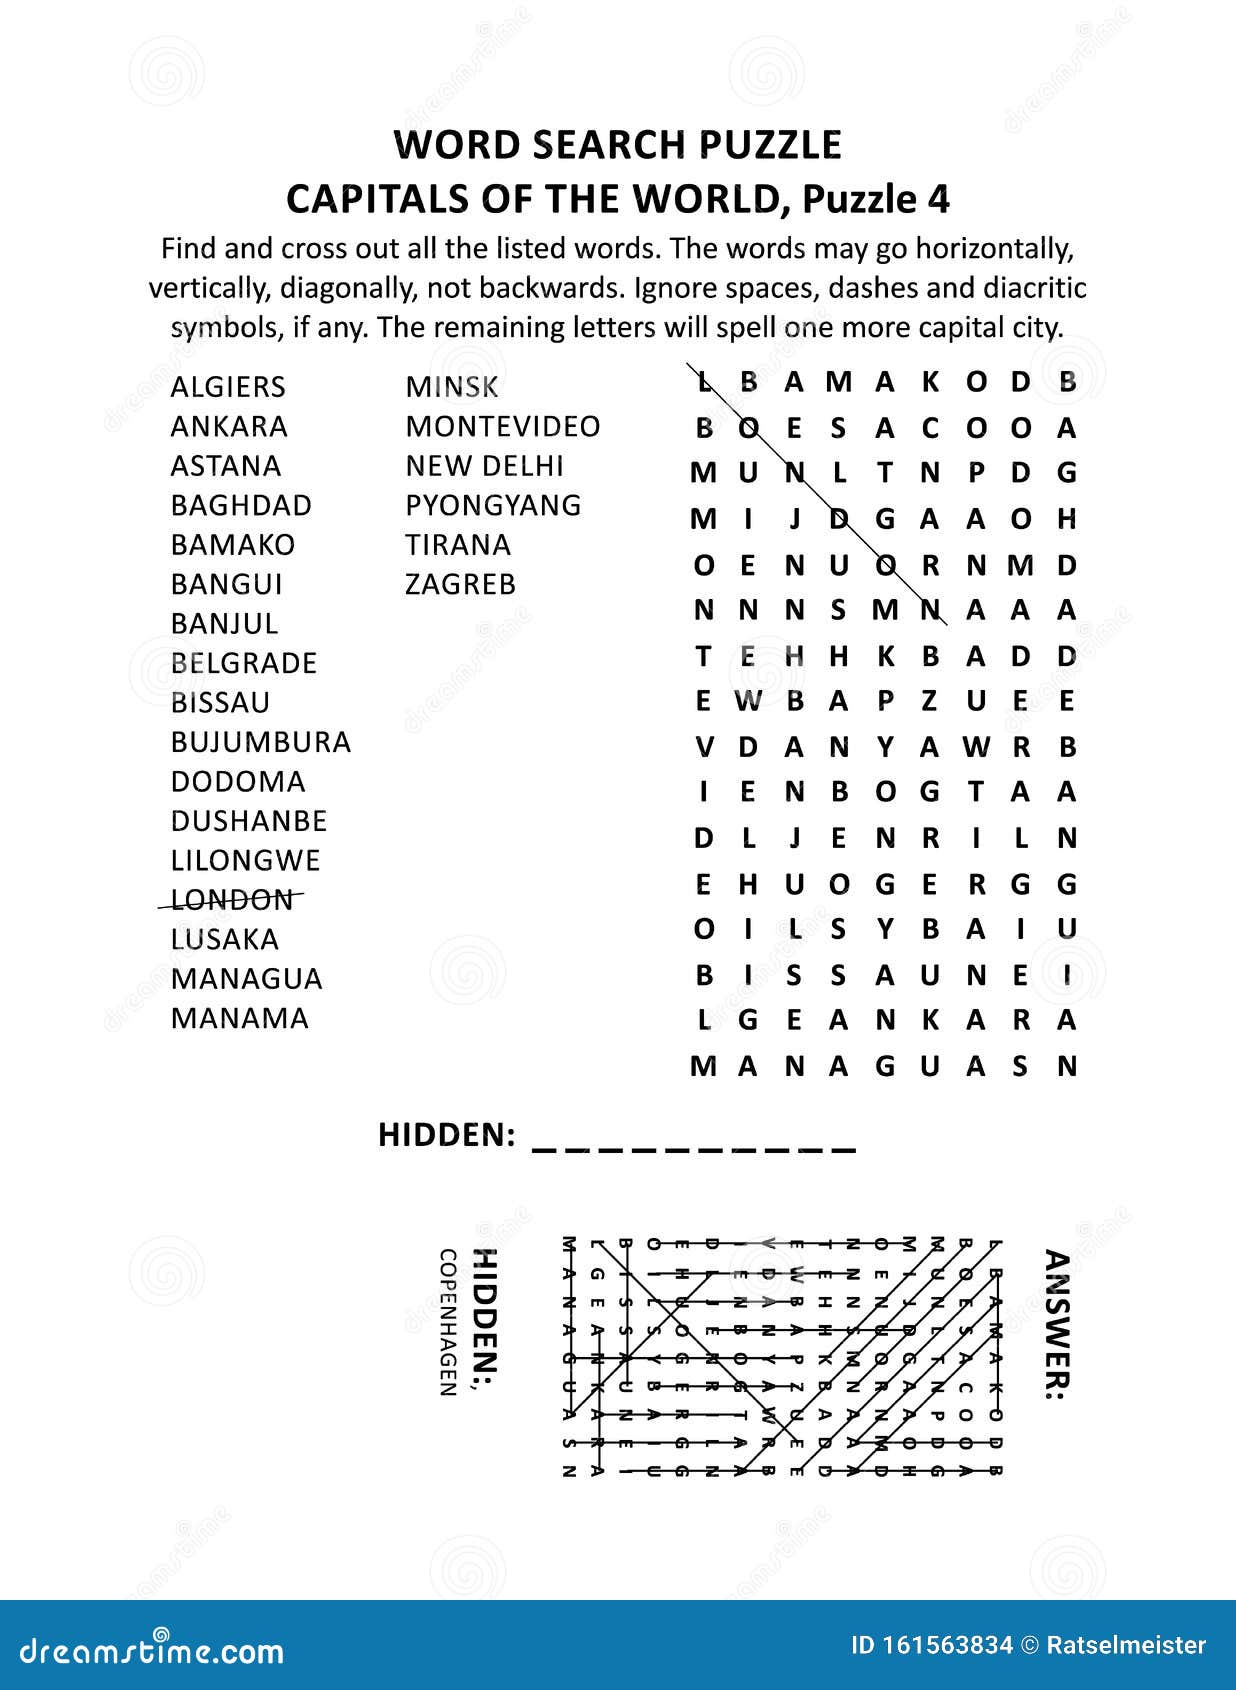 capitals of the world word search puzzle, puzzle 4 of 10